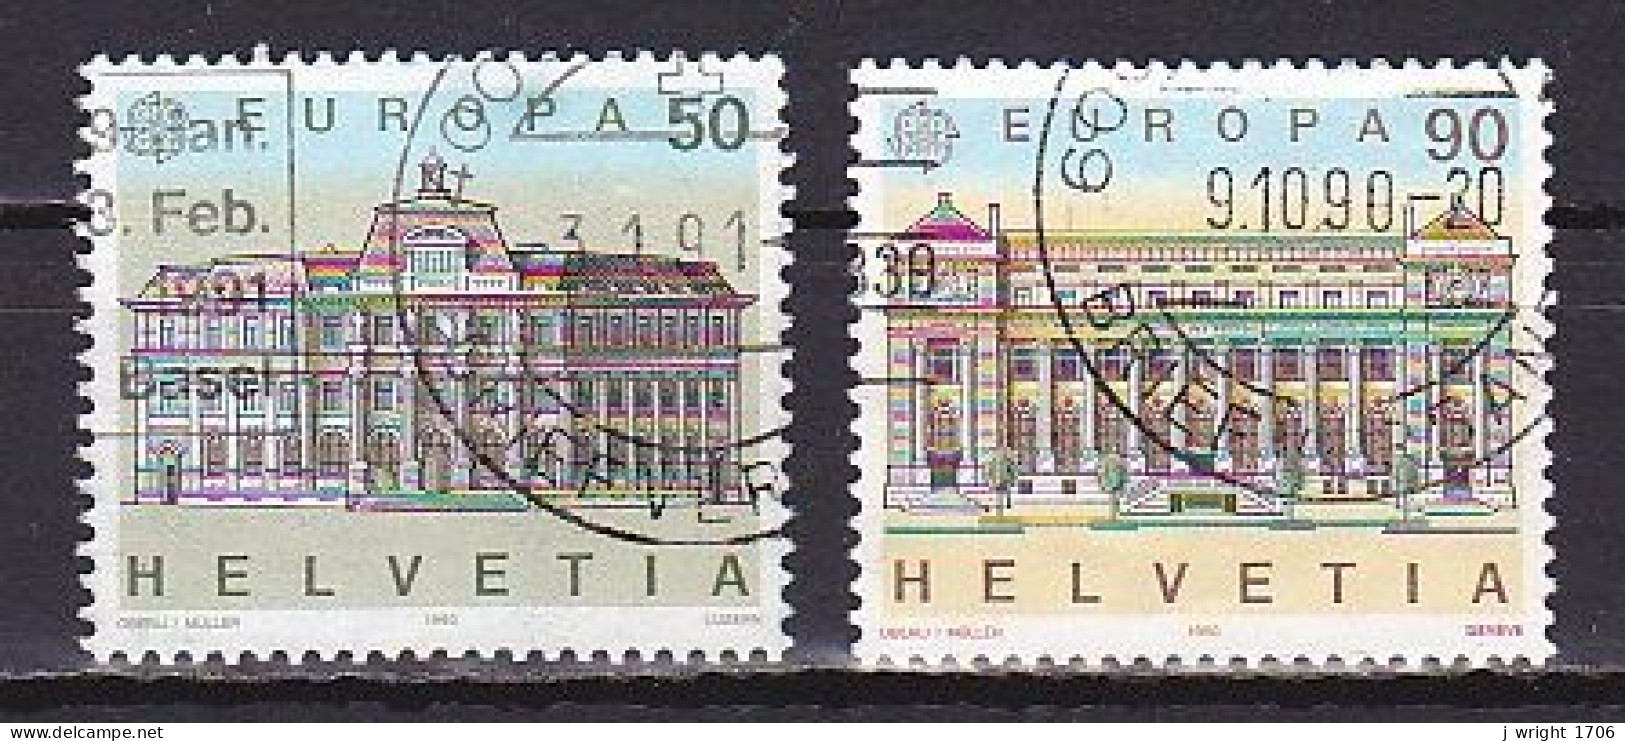 Switzerland, 1990, Europa CEPT, Set, USED - Used Stamps